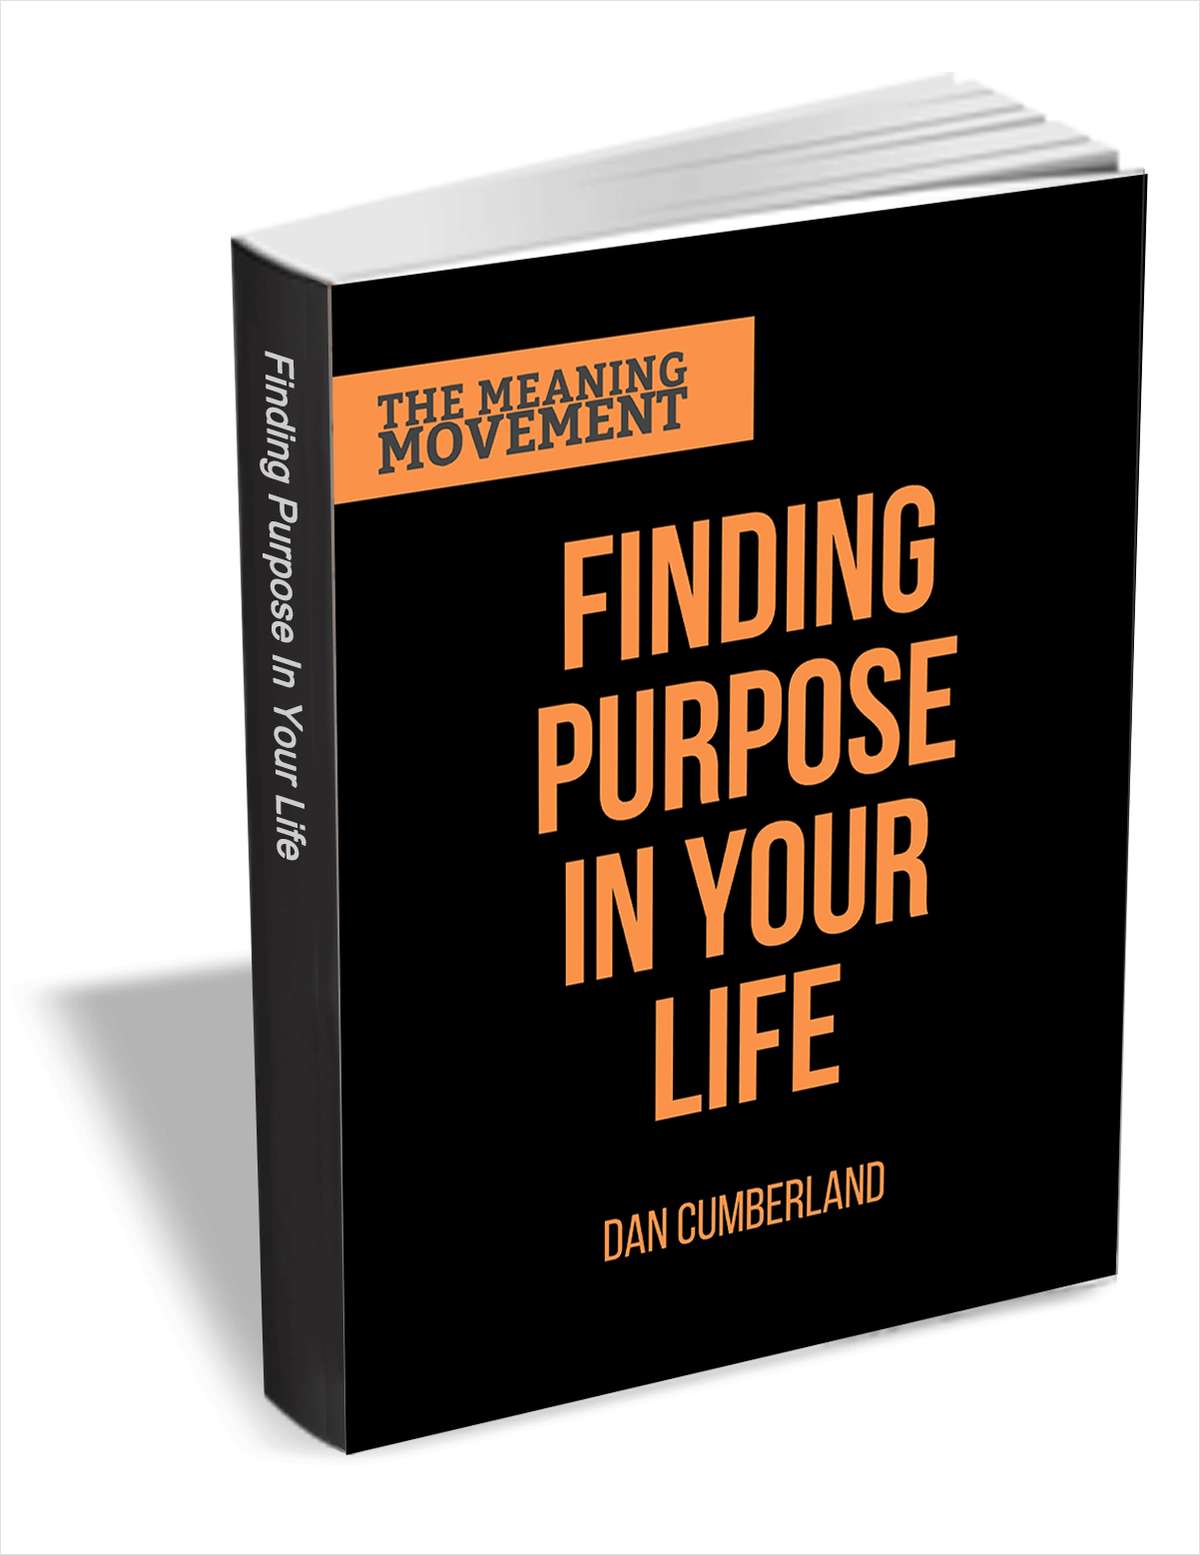 Finding Purpose in Your Life - The Guide to Finding Your Life's Work